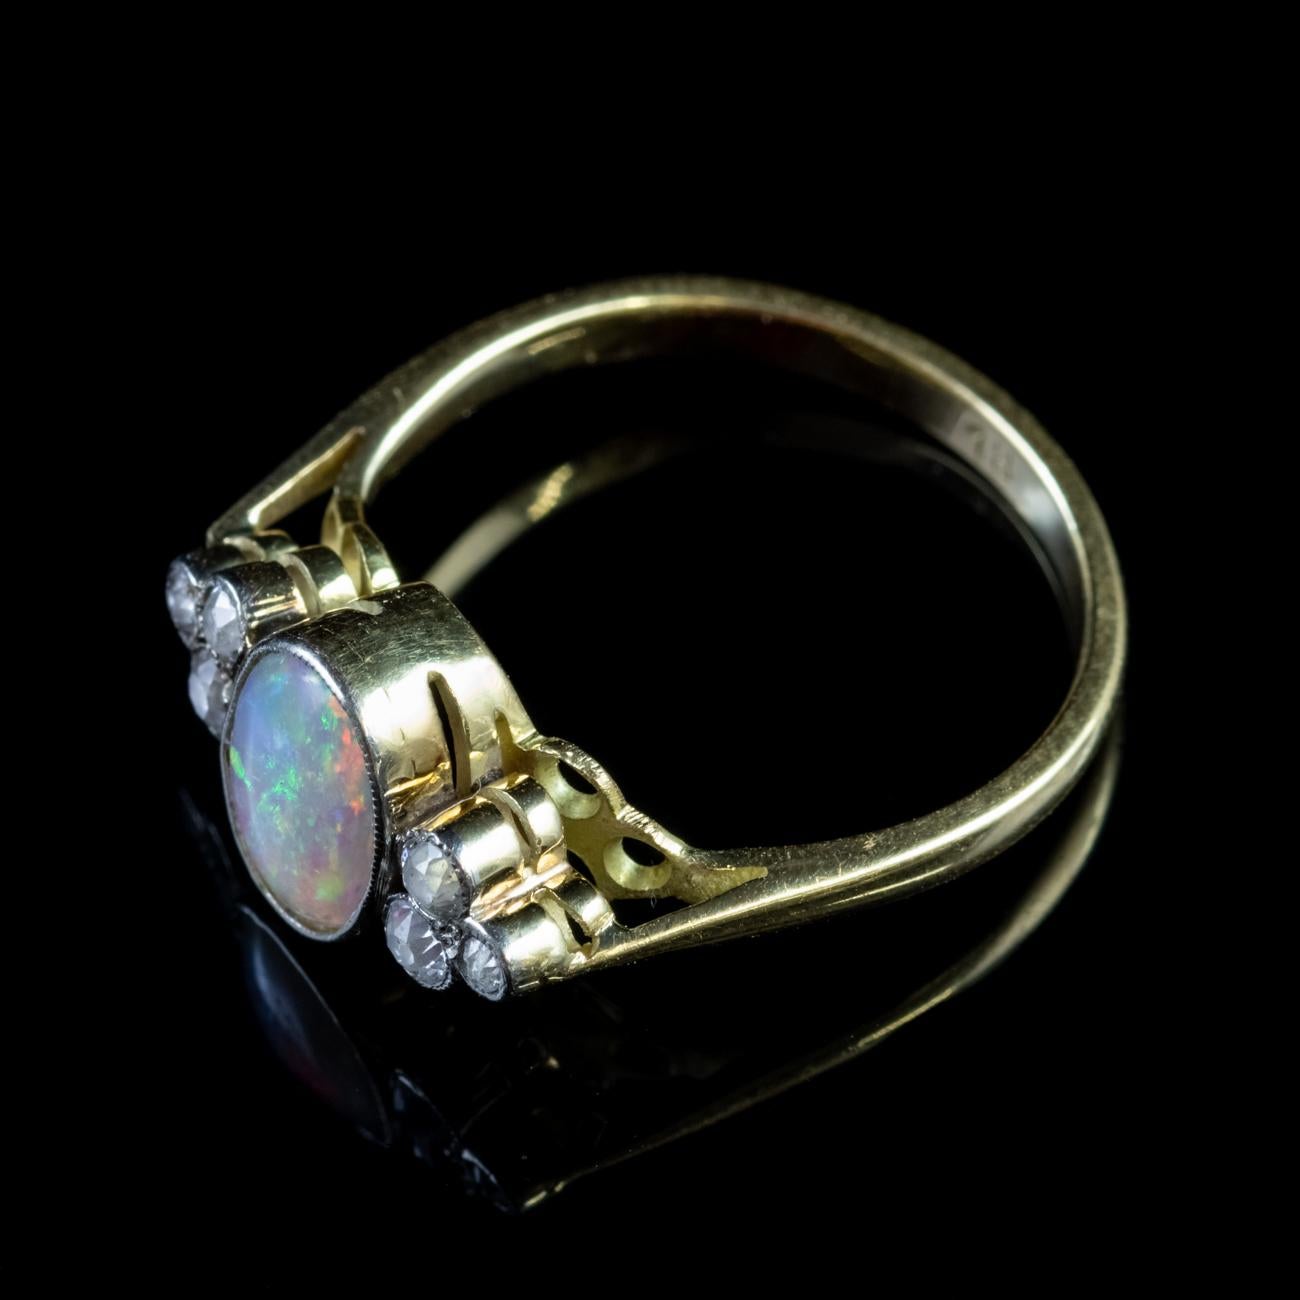 This beautiful Antique Edwardian ring is modelled in 18ct Yellow Gold and is set with a stunning central 1.65ct Natural Opal which is offset by three dazzling old cut Diamonds on either side. The Diamonds are miligrain set and weigh approx 0.08ct